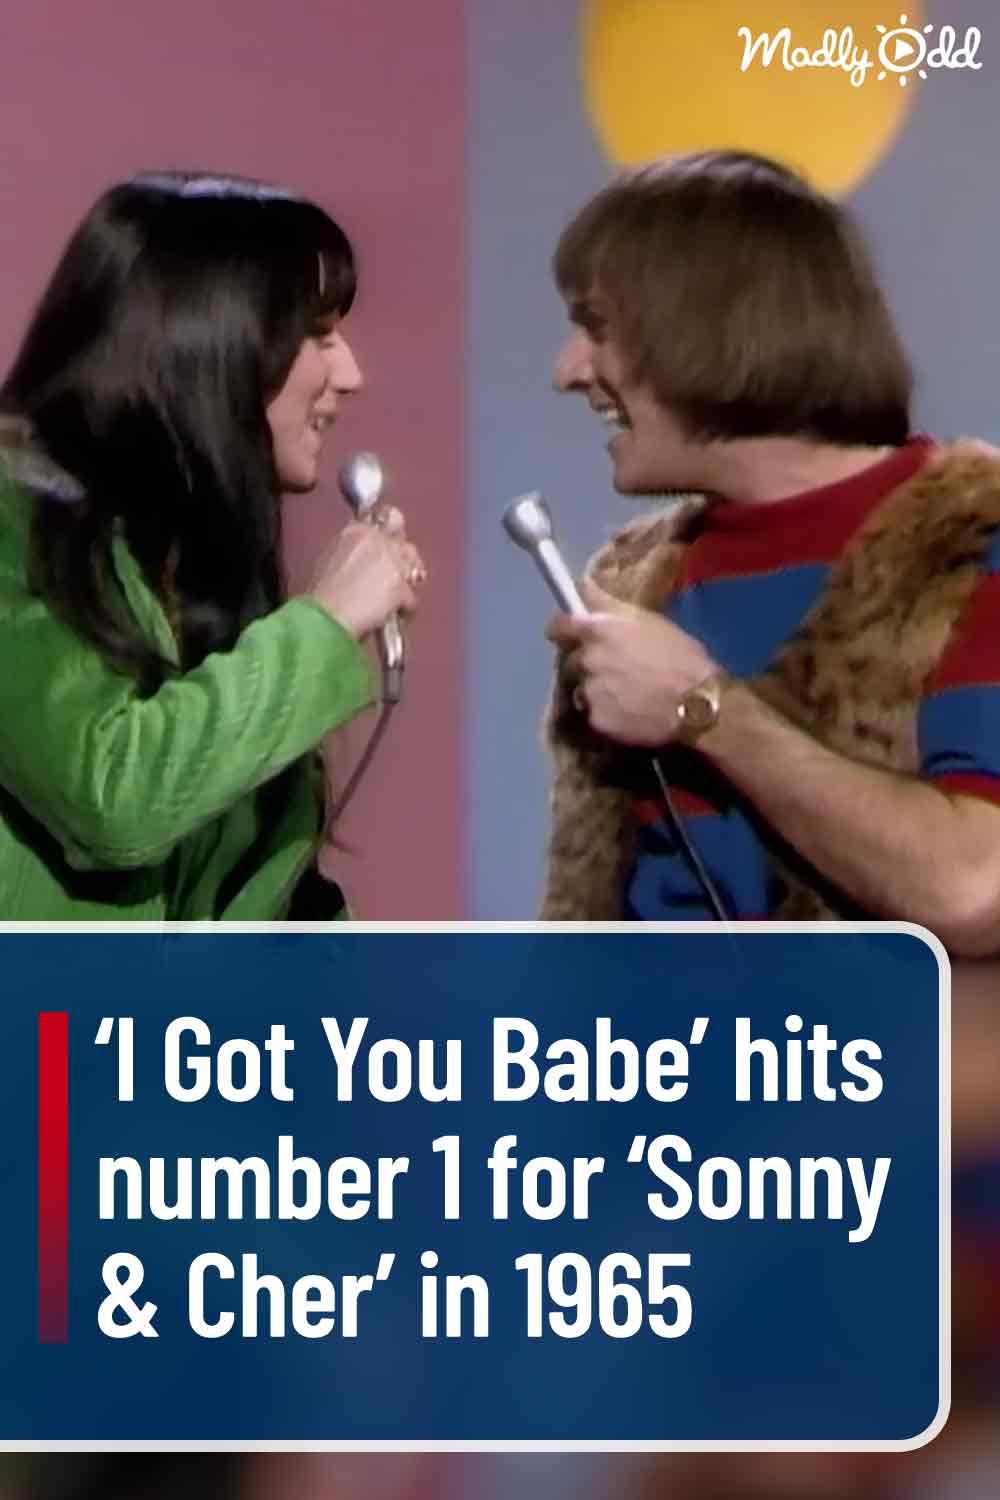 ‘I Got You Babe’ hits number 1 for ‘Sonny & Cher’ in 1965